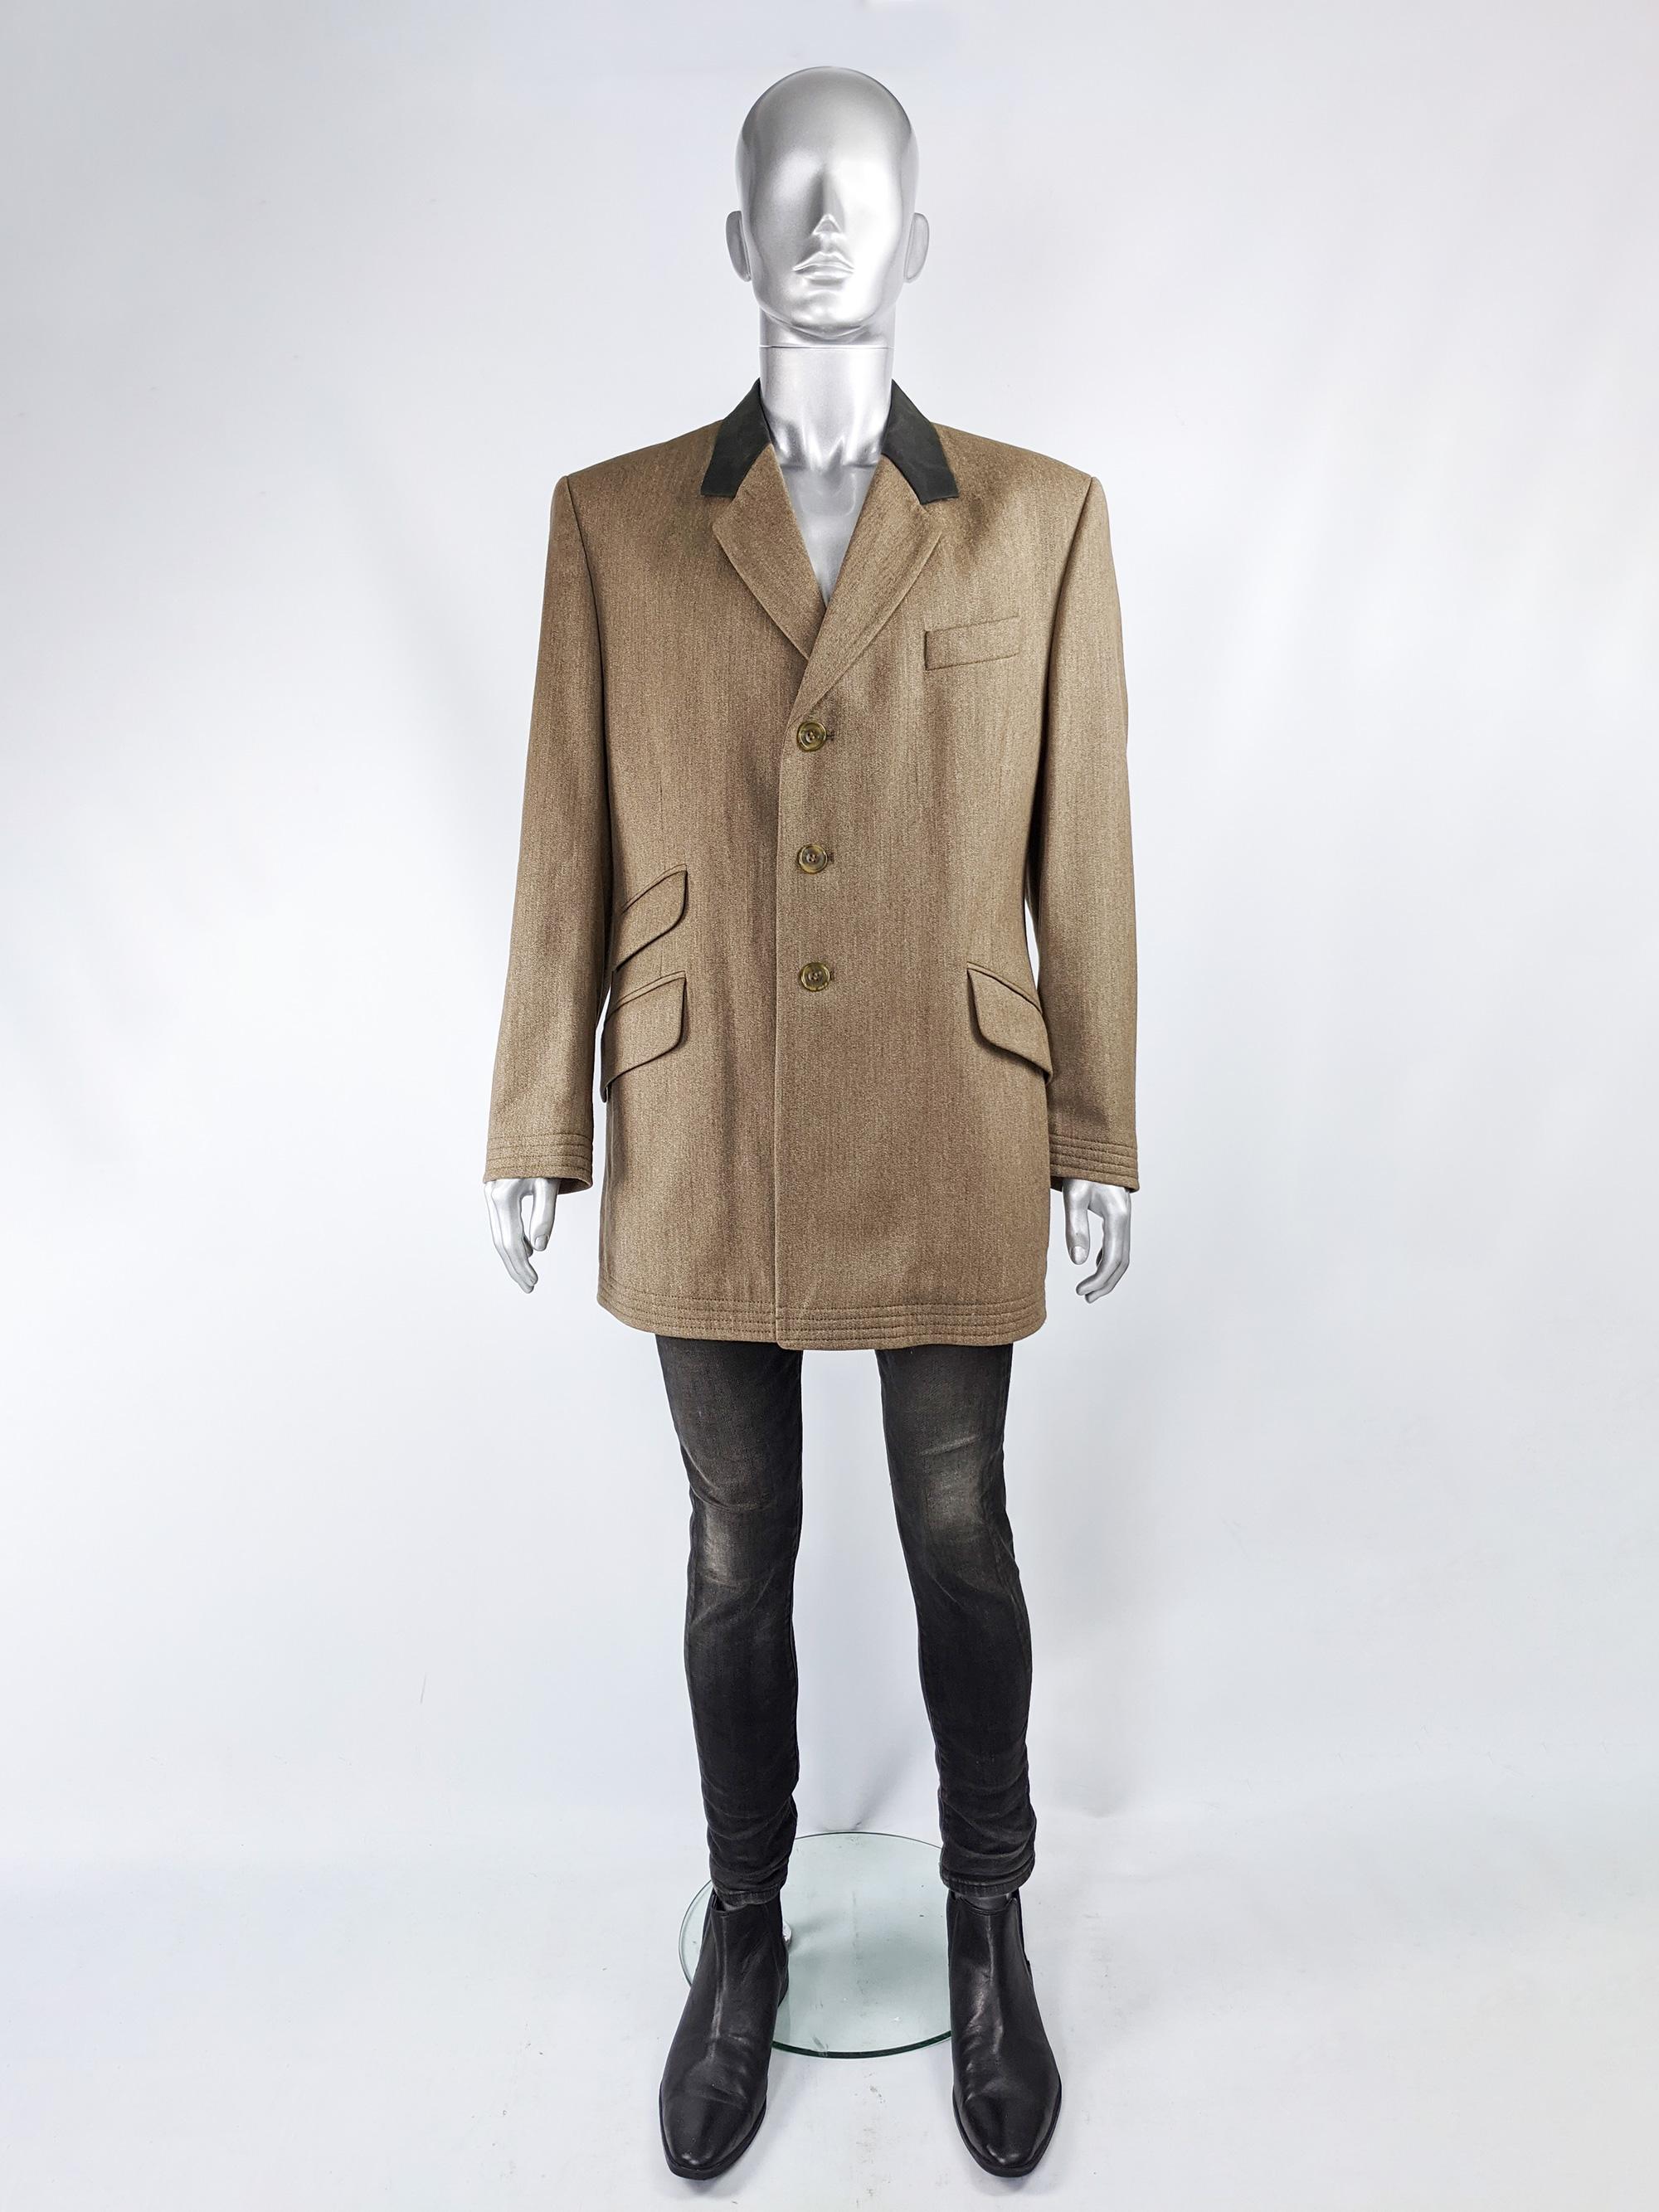 A stylish and rare vintage mens chesterfield style coat from the 90s by luxury British fashion house, Joseph. In a brown wool tweed with a waxed cotton collar, top stitching and multiple flap pockets for a timeless look. 

Size: Marked UK 40 / US 40